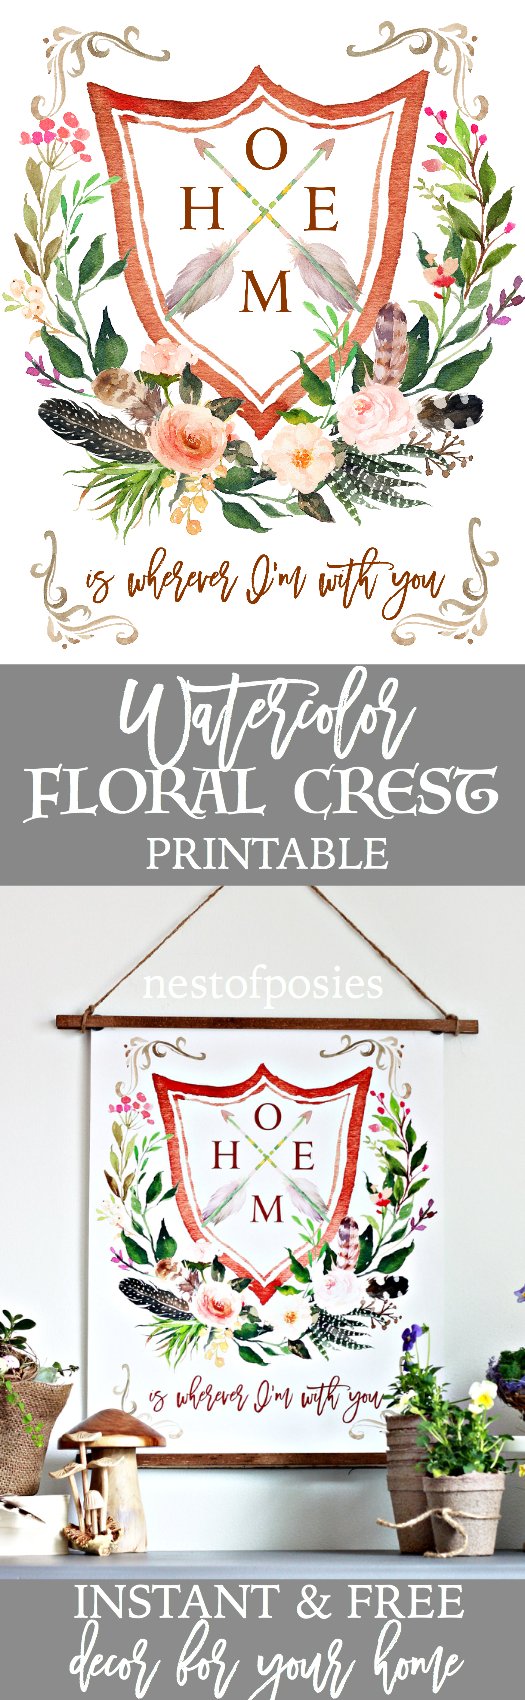 Watercolor Floral Crest Printable. Instant and free decor for your home